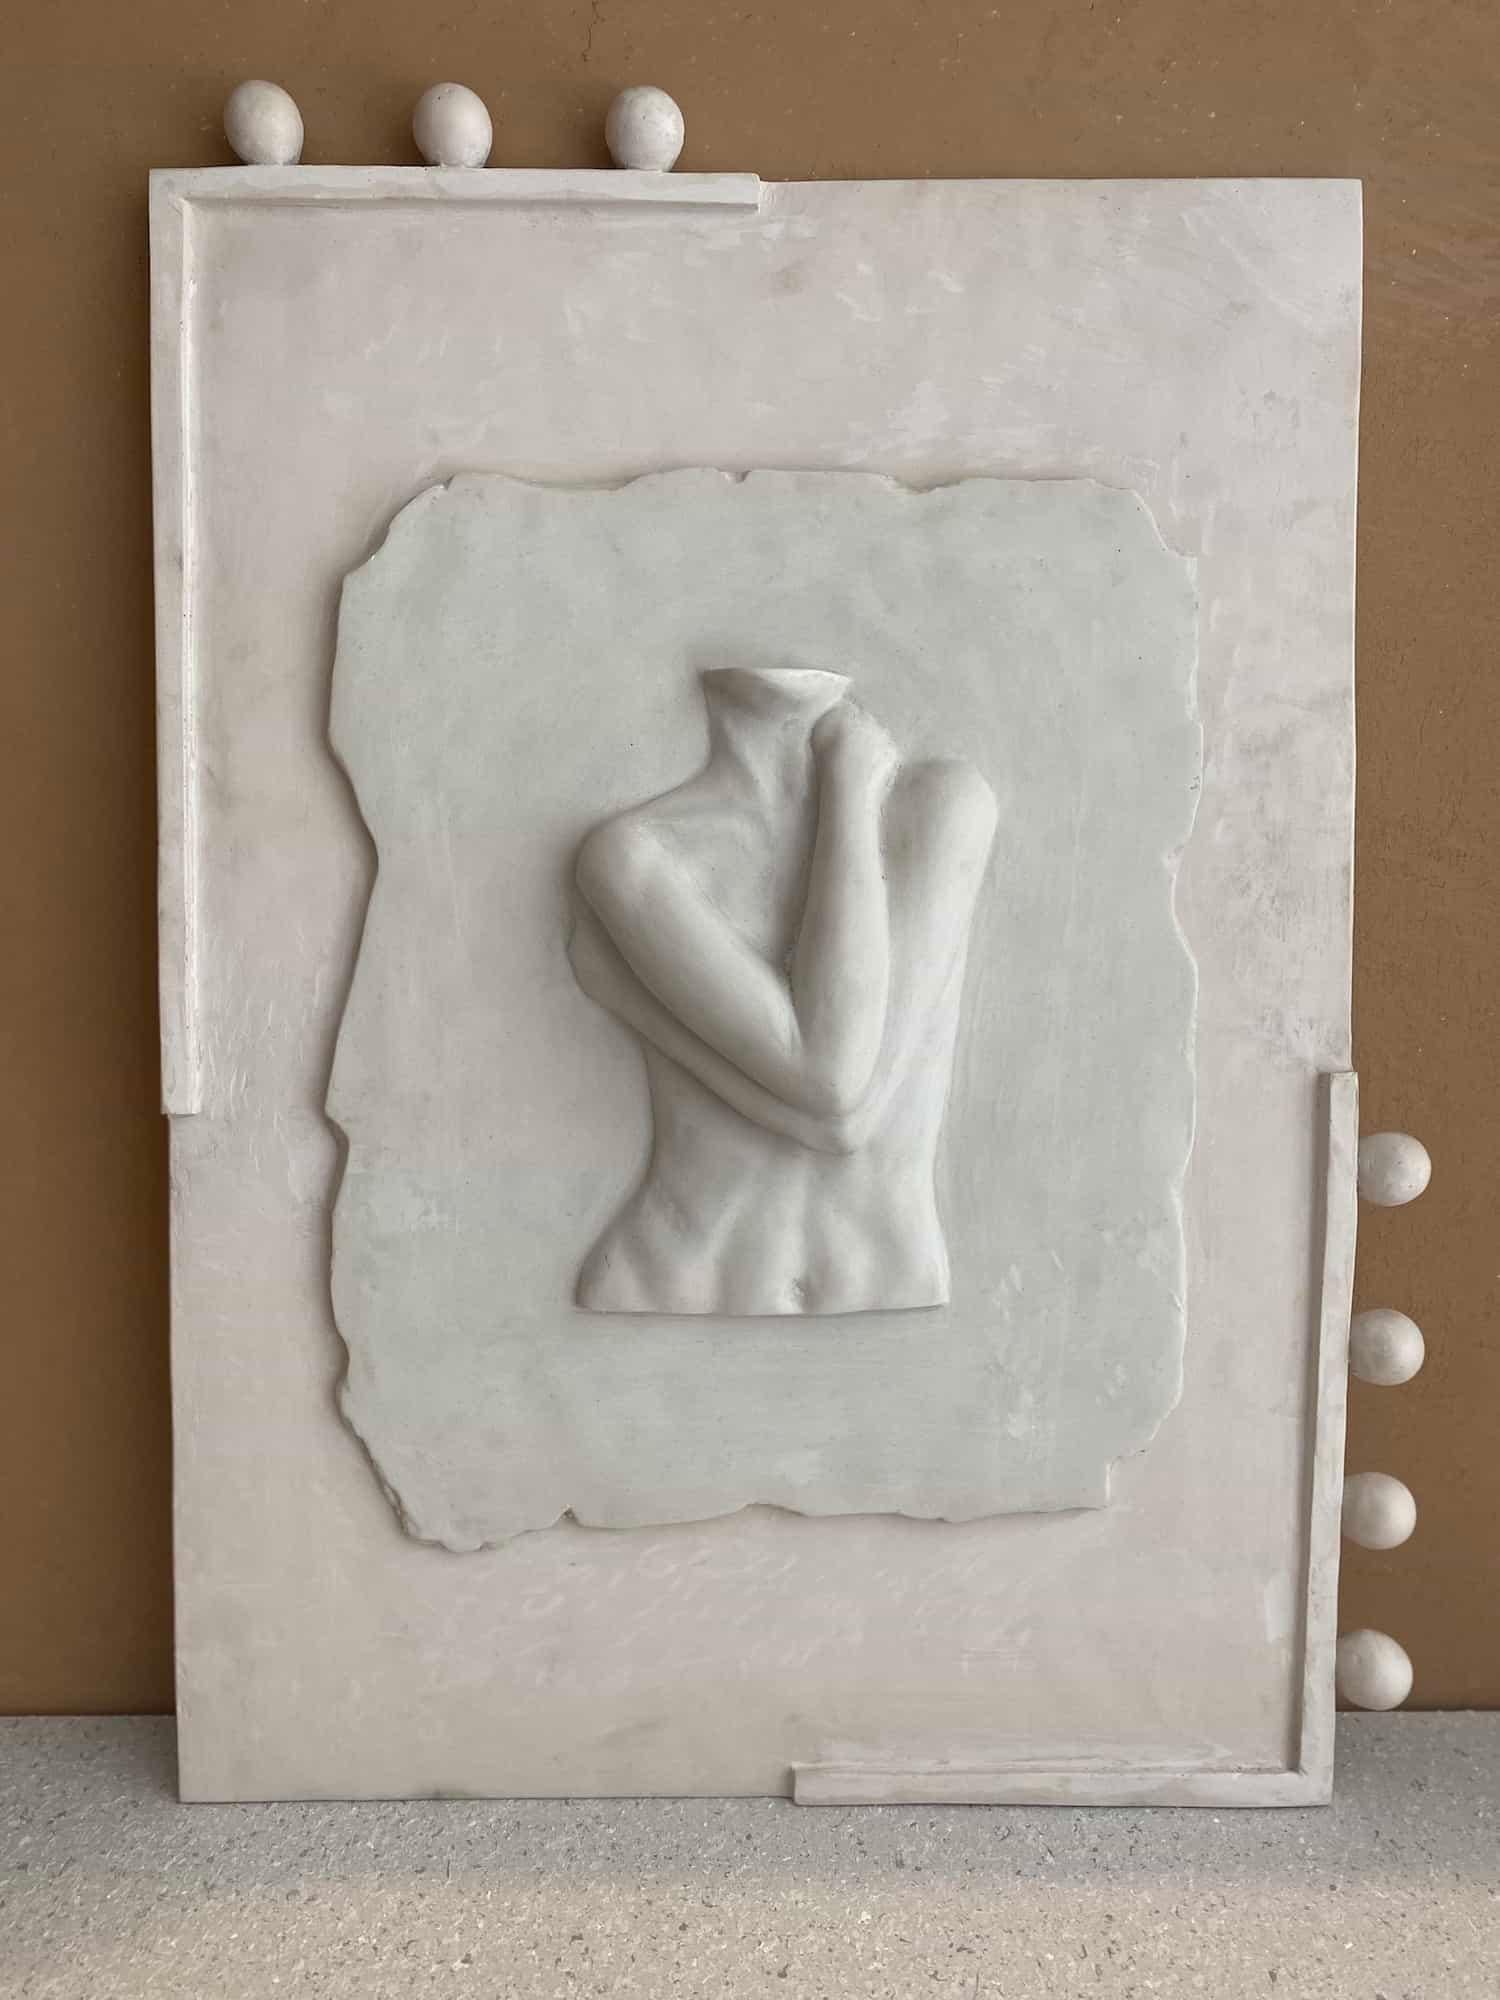 Object No.25 wall piece by Marcela Cure
Dimensions: W 61.5 x D 7 x H 82 cm
Materials: Resin and Stone Composite

This collection is inspired by the delicate curves of the female body, displaying soothing pieces that evoke effortless